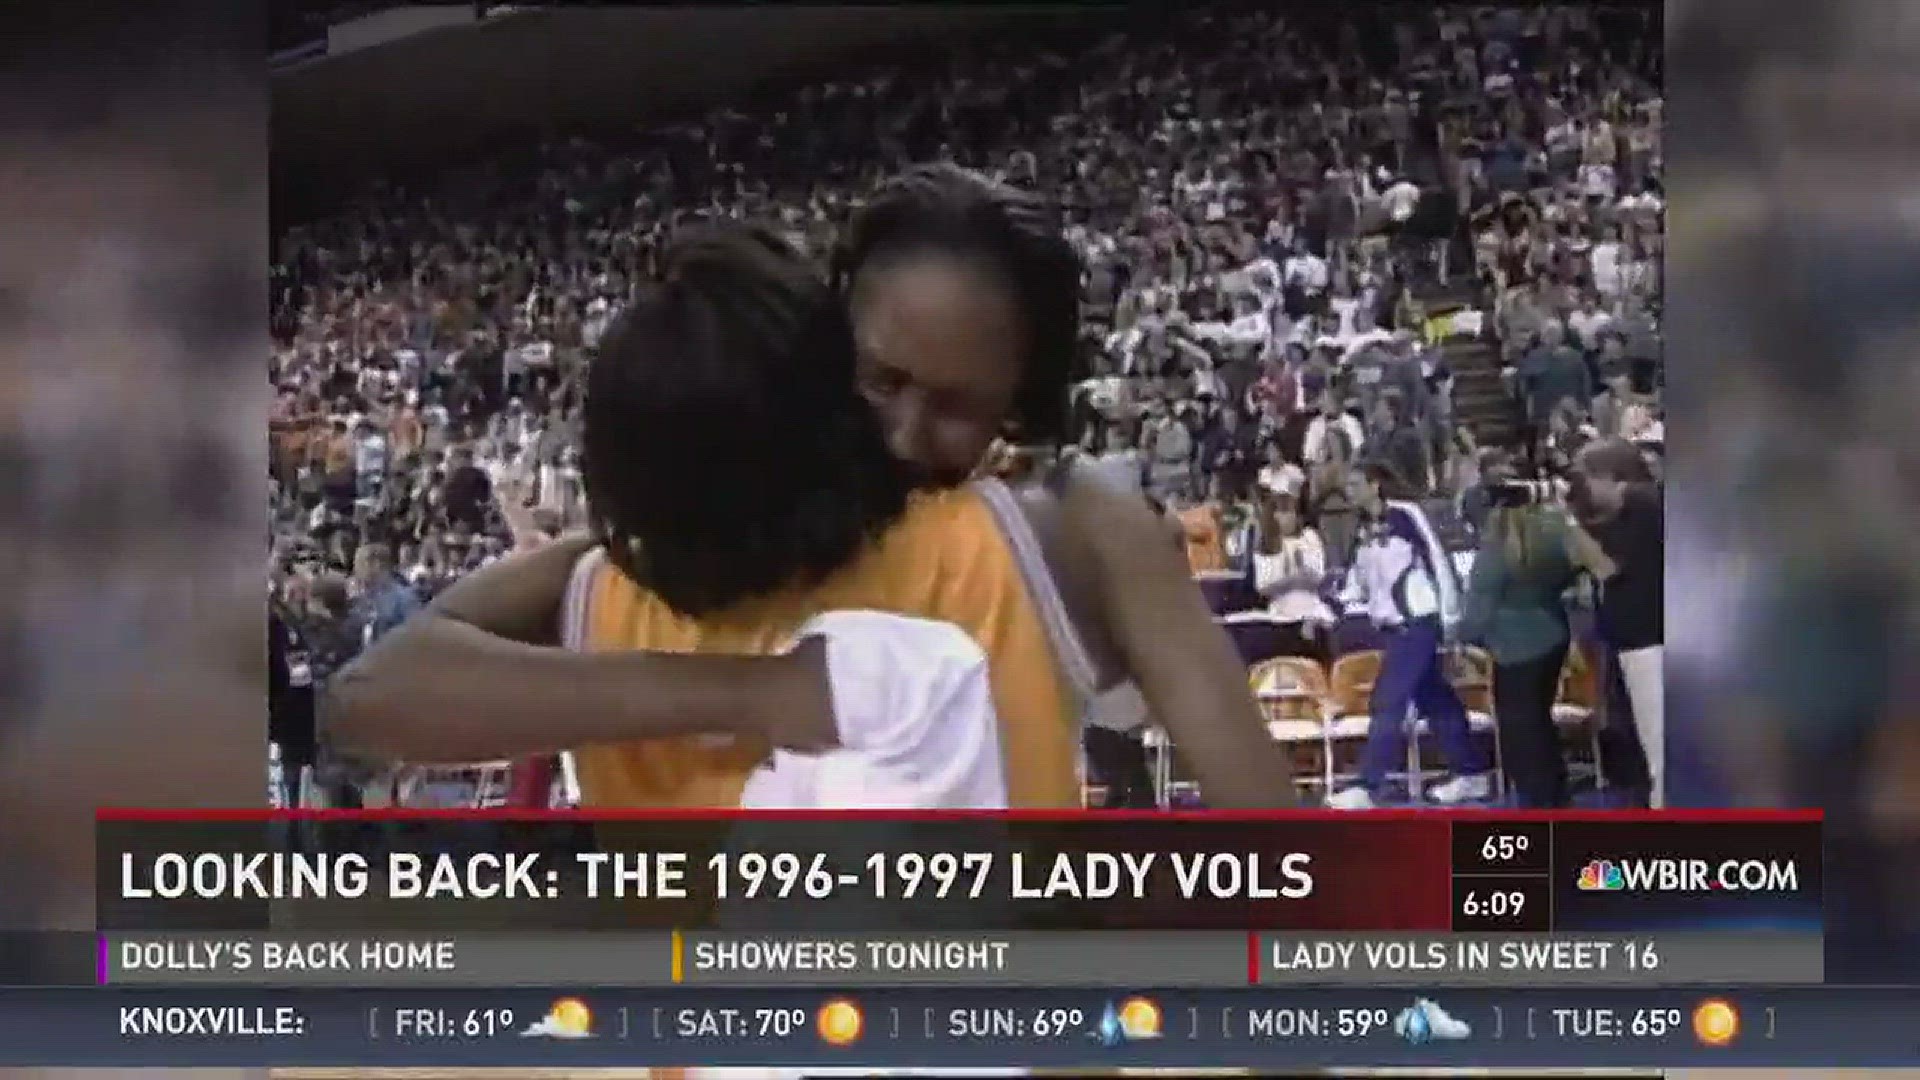 The Lady Vols are in the Sweet 16 after a disappointing season, but they're not the first Tennessee team that's fought back and found success in tournament time.